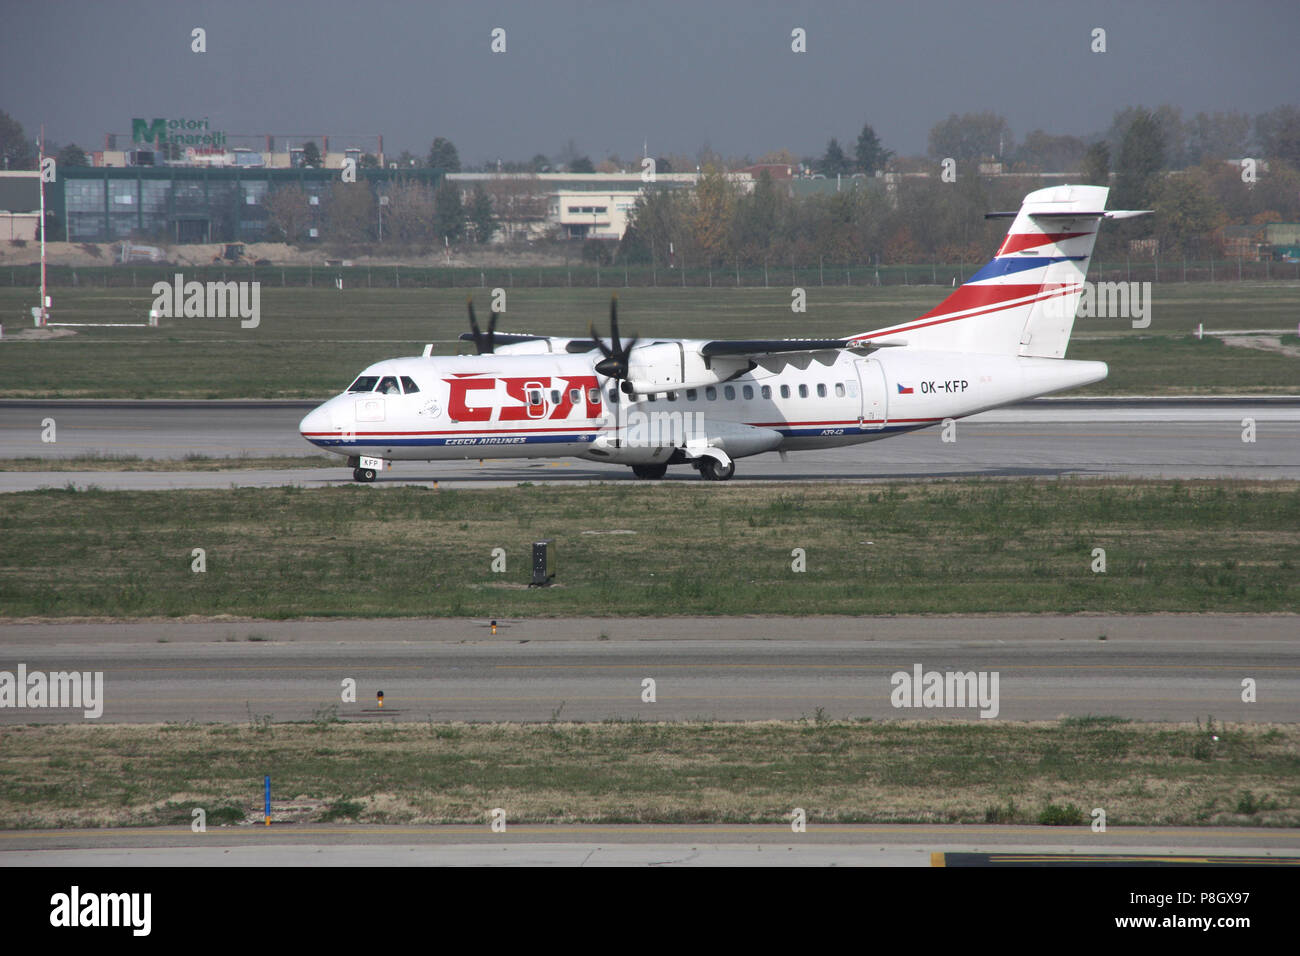 BOLOGNA, ITALY - OCTOBER 29: ATR 42 of Czech Airlines on October 29, 2009 at Bologna Airport, Italy. Year 2011 is the best ever for ATR - the company  Stock Photo